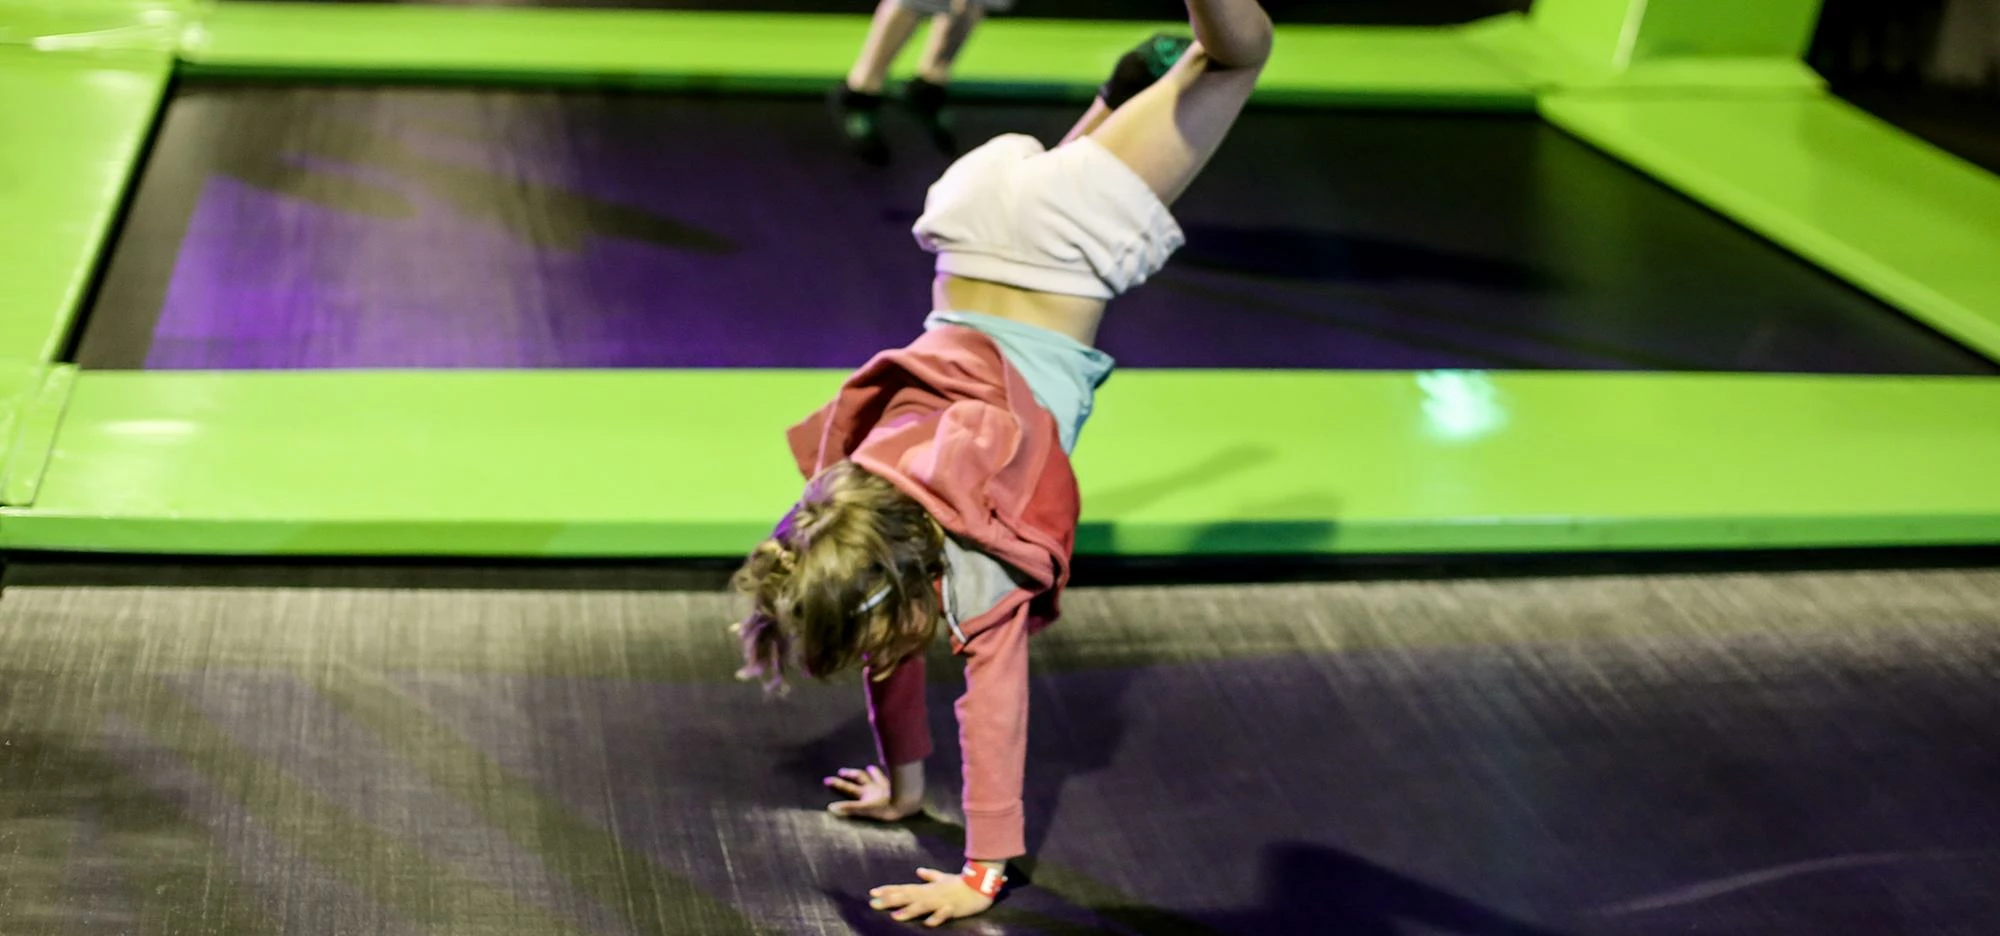 There are activities for all the family at Flip Out Chatham